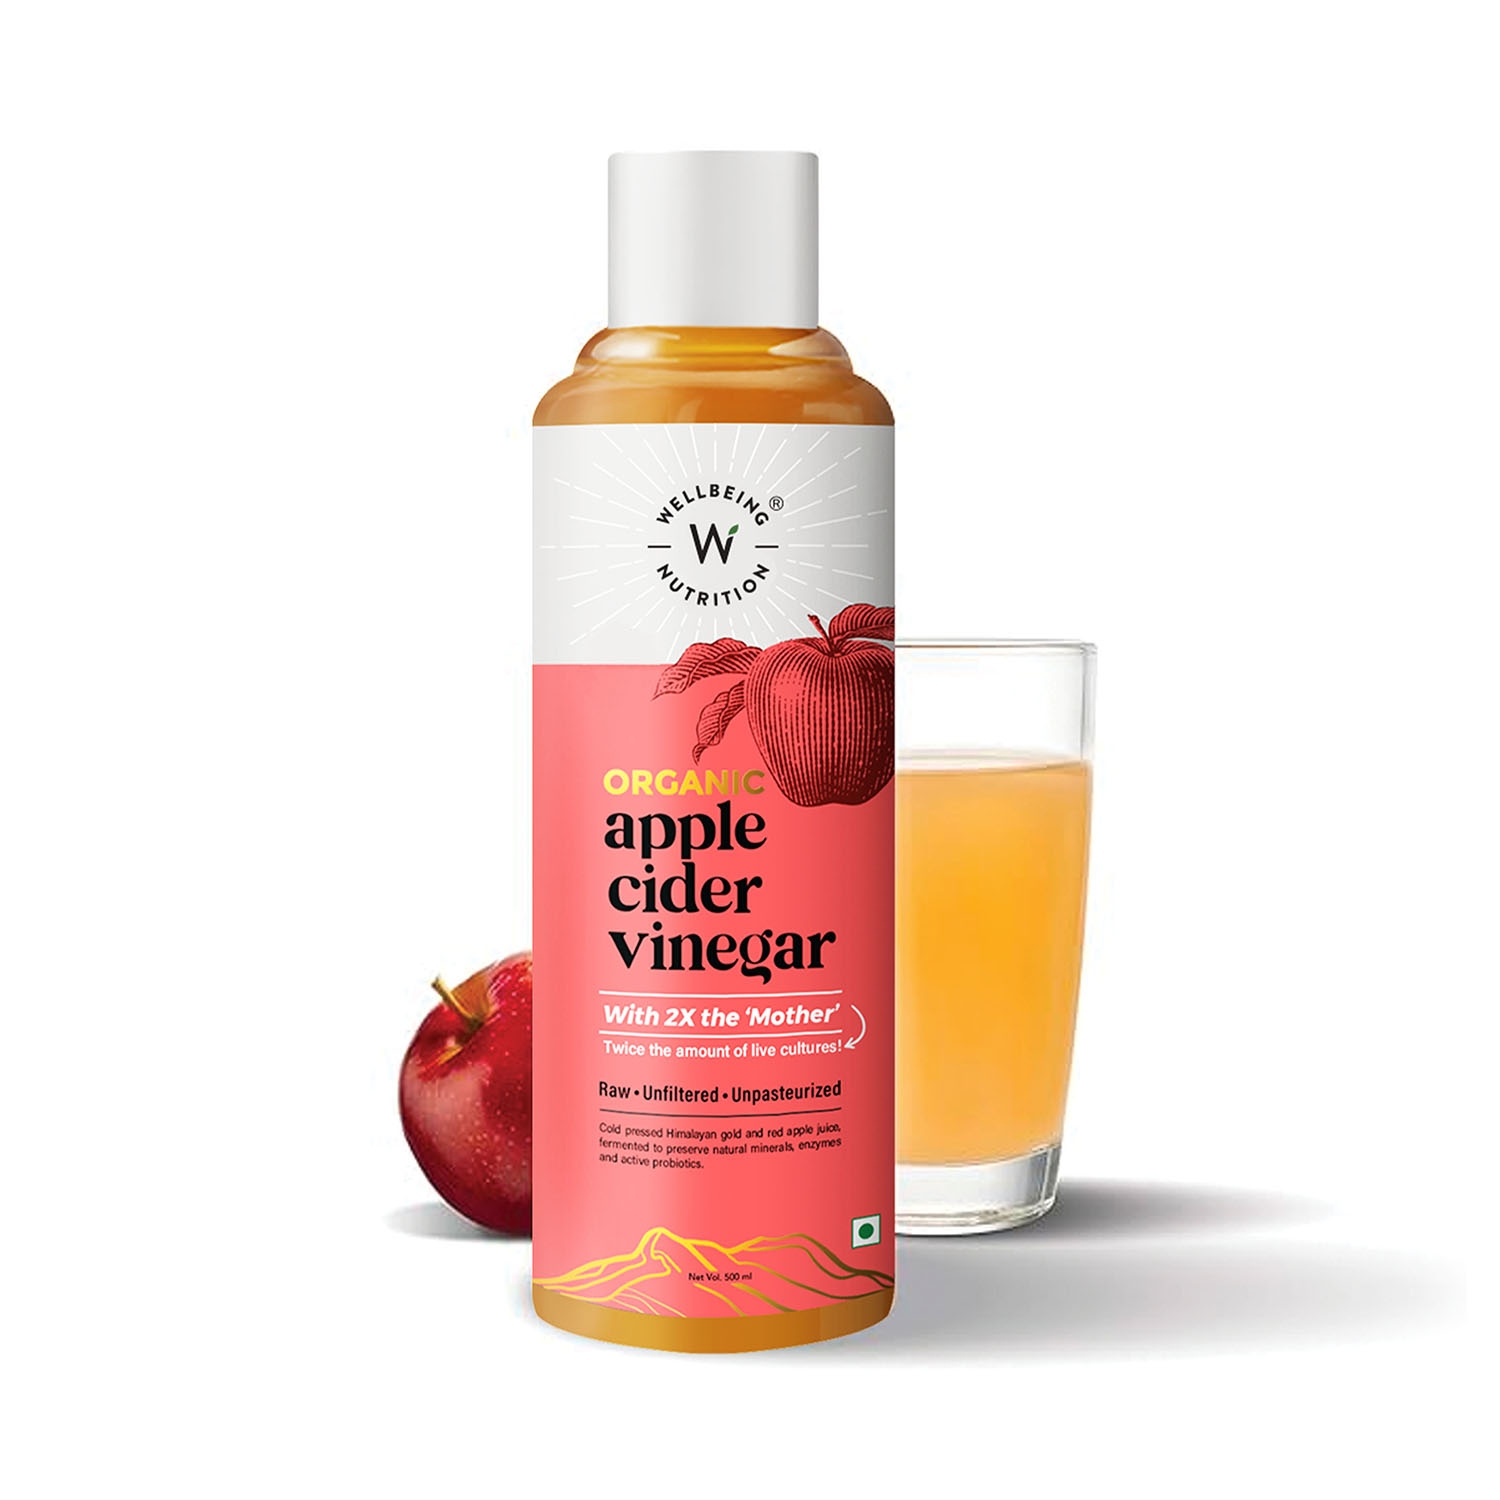 Wellbeing Nutrition | Wellbeing Nutrition Organic Apple Cider Vinegar with 2X Enzymes for Weight & Blood Sugar Control